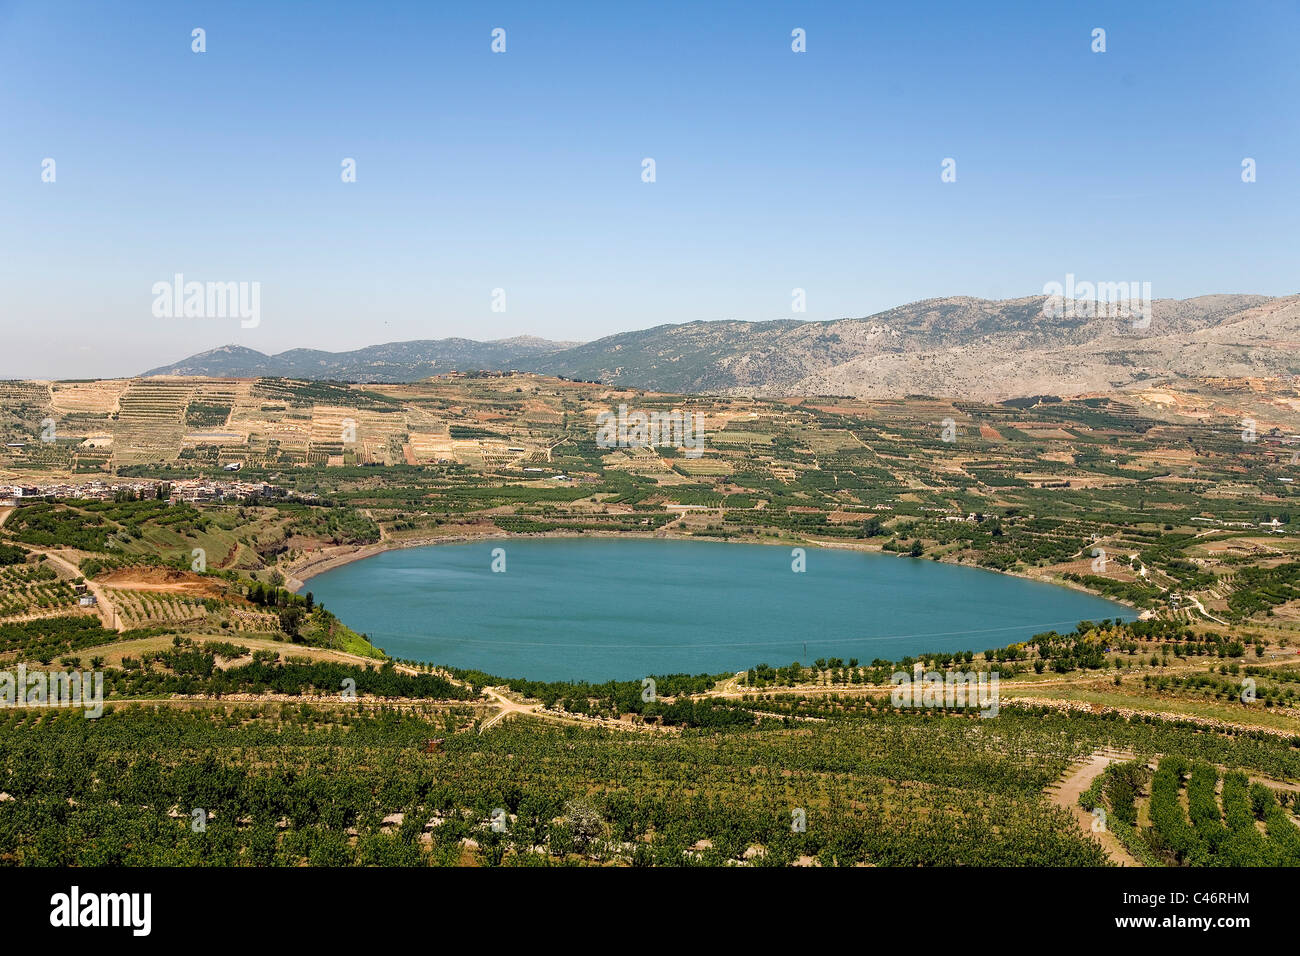 Aerial photograph of Ram's pool in the northern Golan Heights Stock Photo